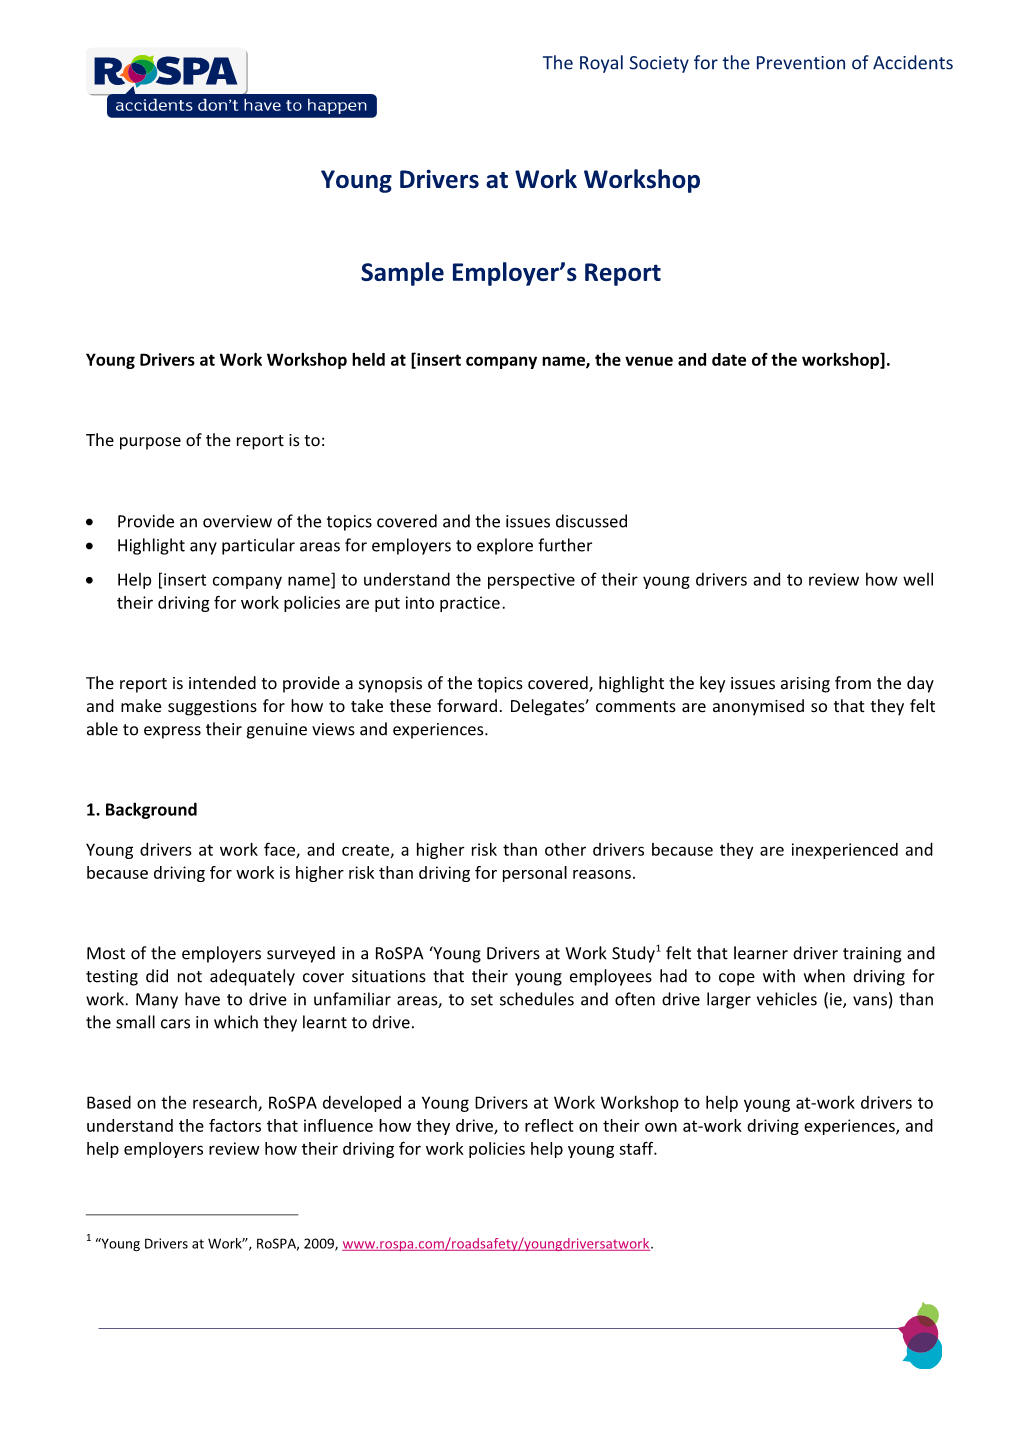 Young Drivers at Work Workshop Sample Employer's Report